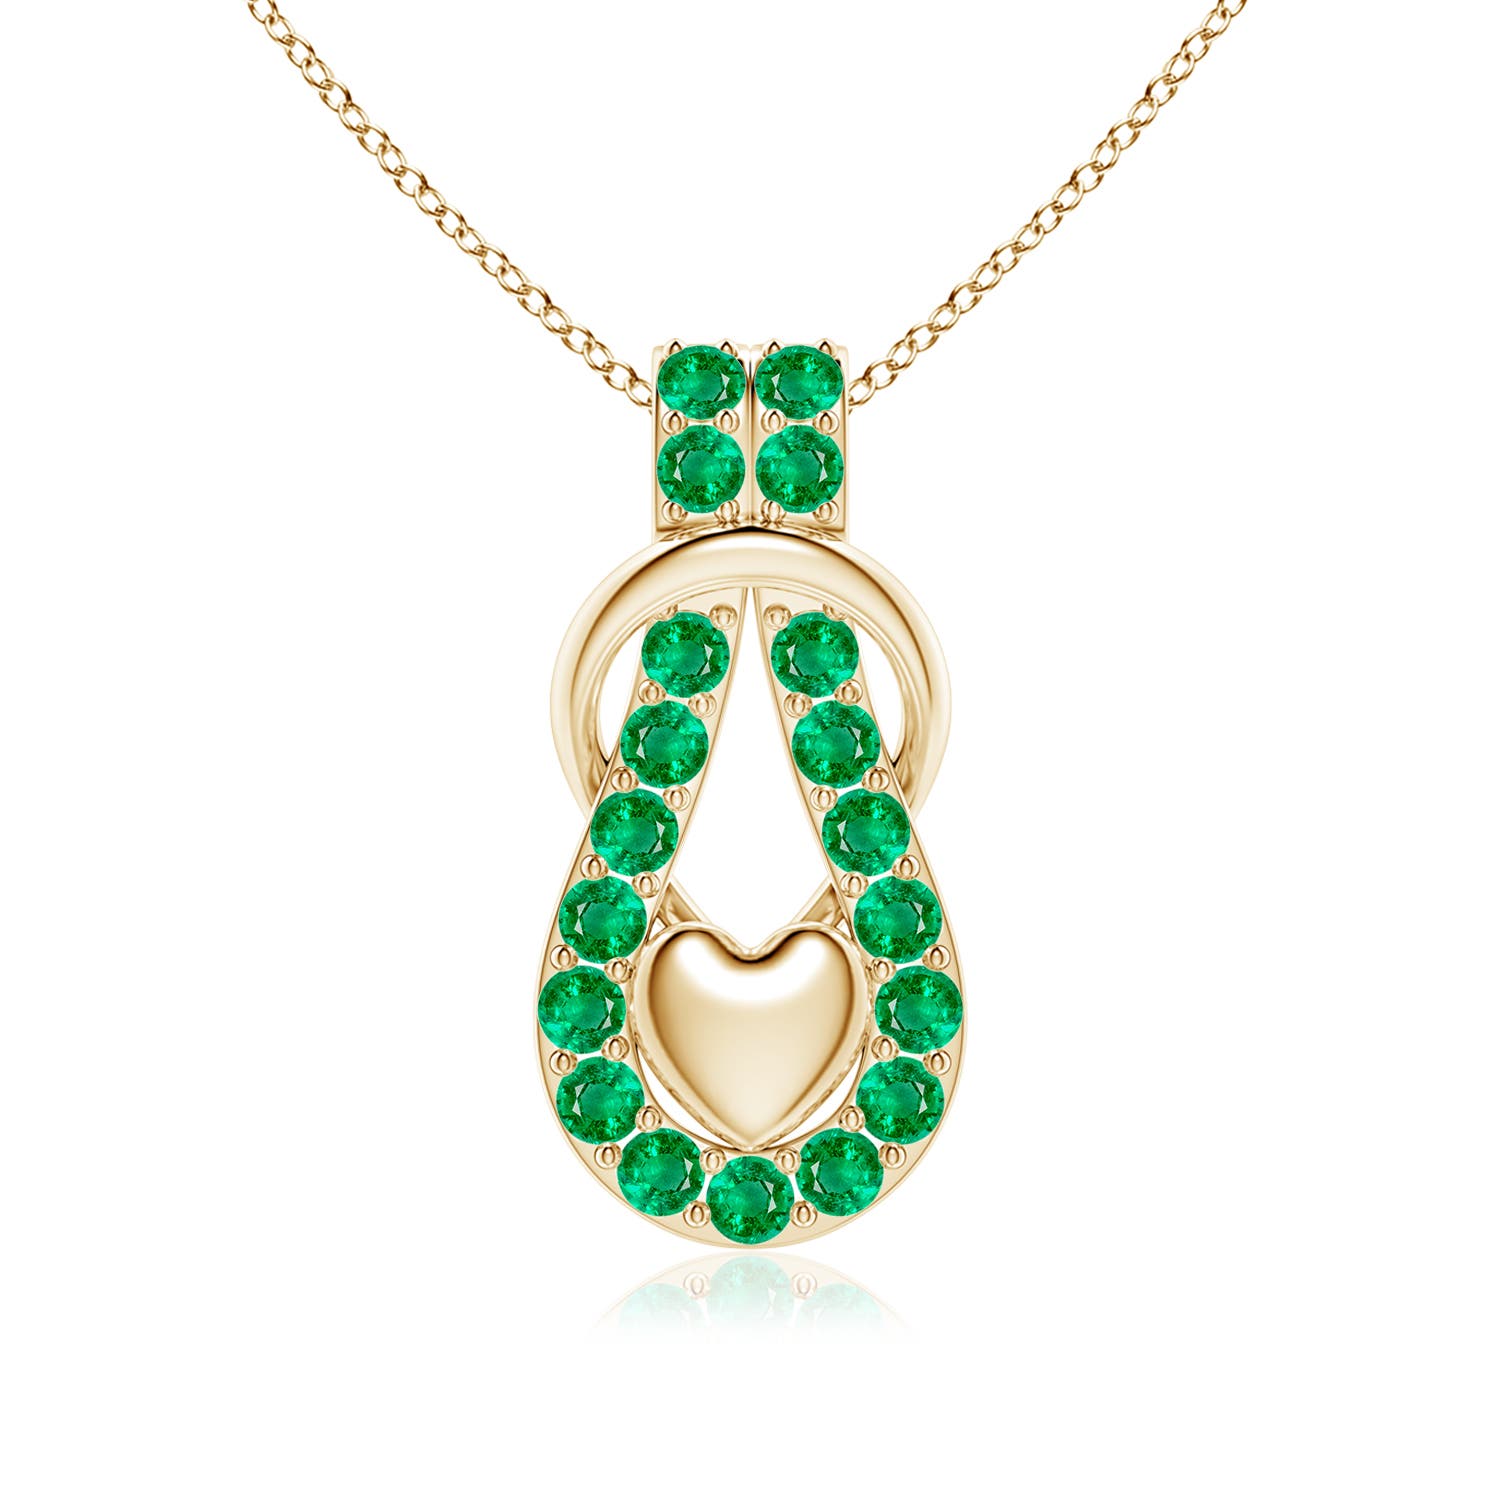 AAA - Emerald / 1.9 CT / 18 KT Yellow Gold